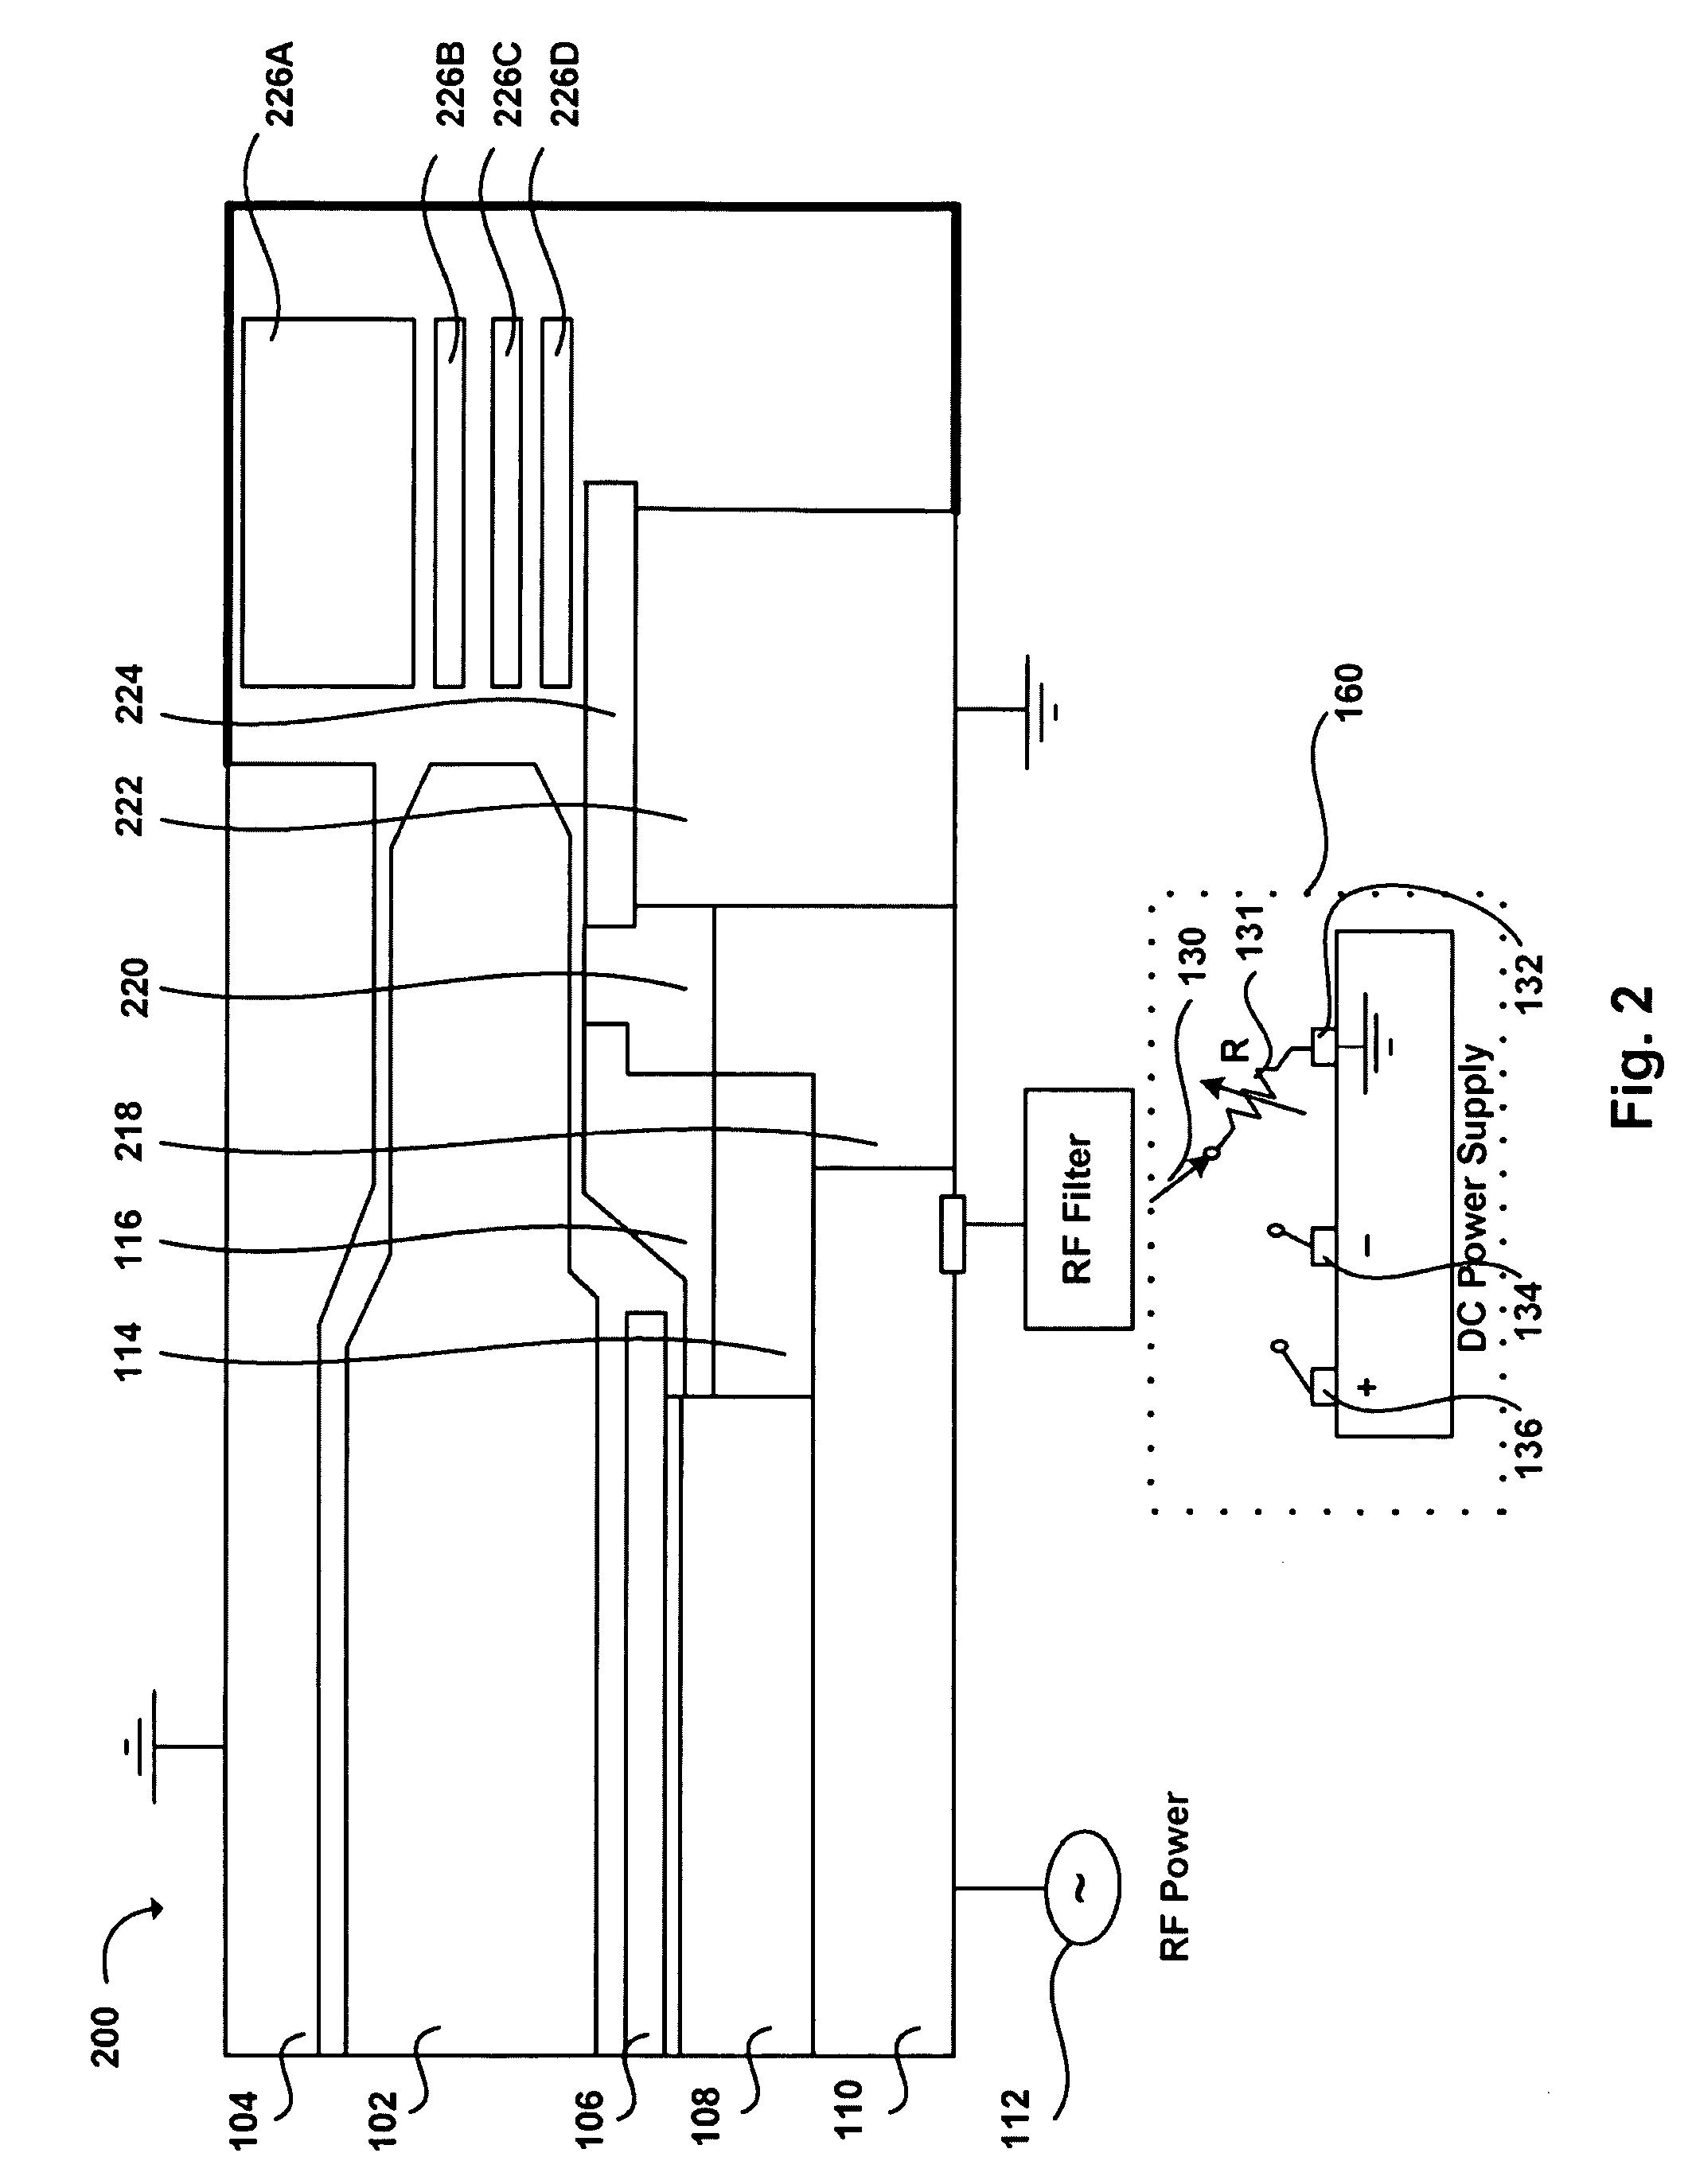 Method and apparatus for DC voltage control on rf-powered electrode